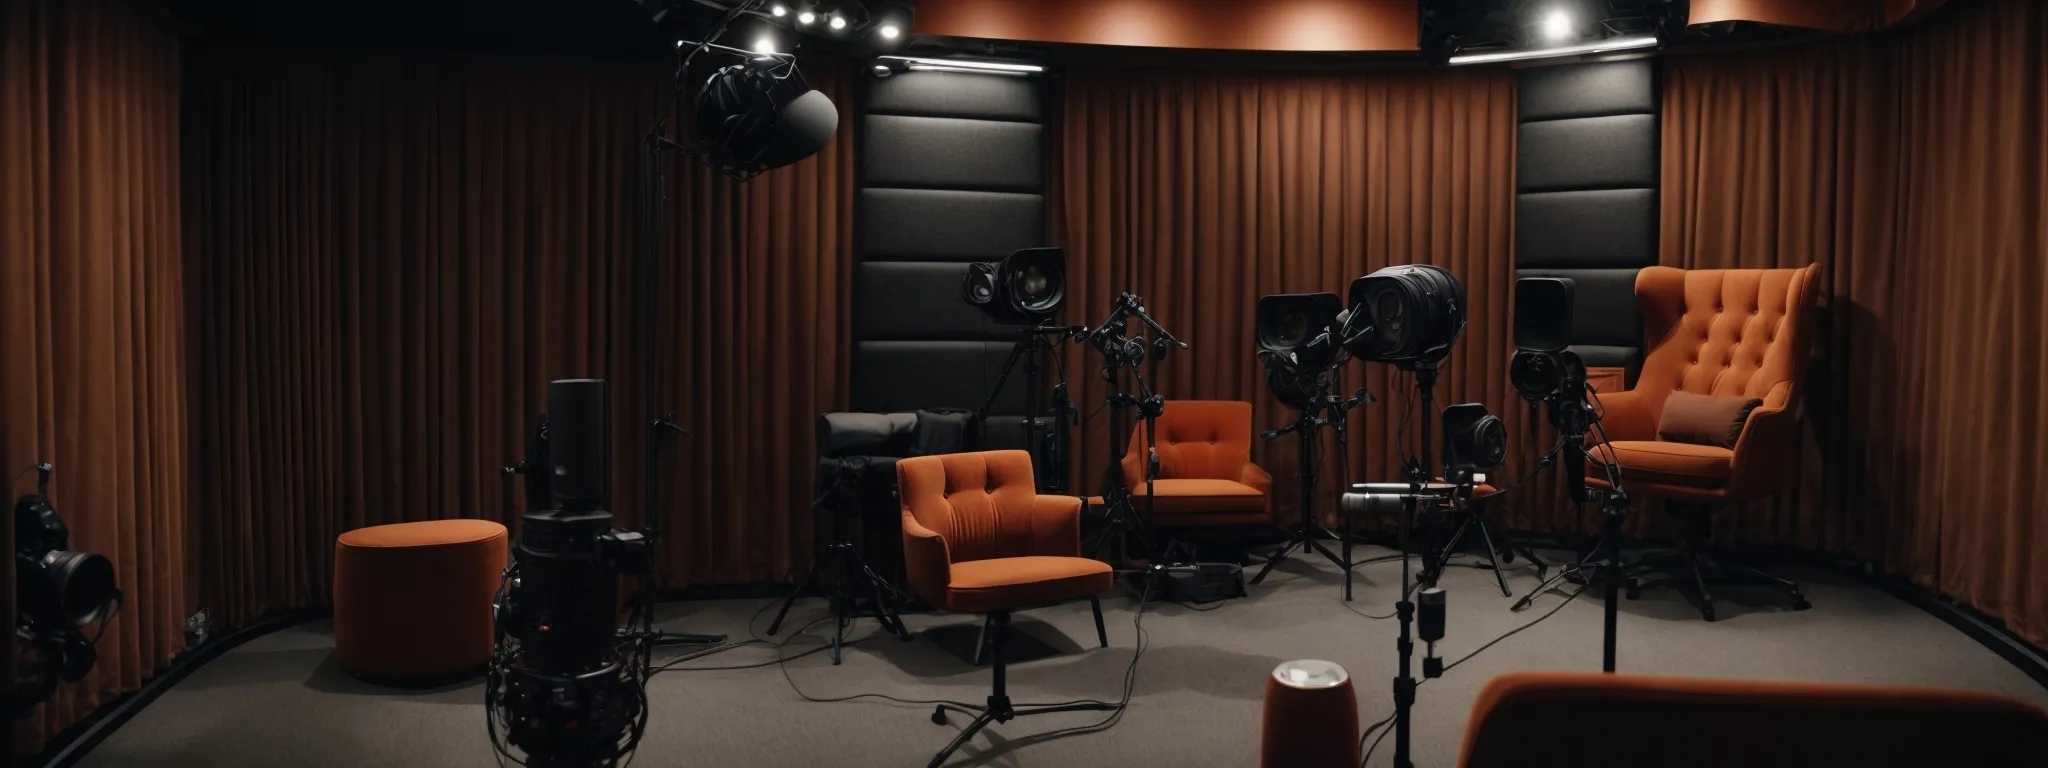 a podcast studio with an unoccupied chair and a microphone set amidst soundproofing panels, indicating a space for sharing professional stories and insights.